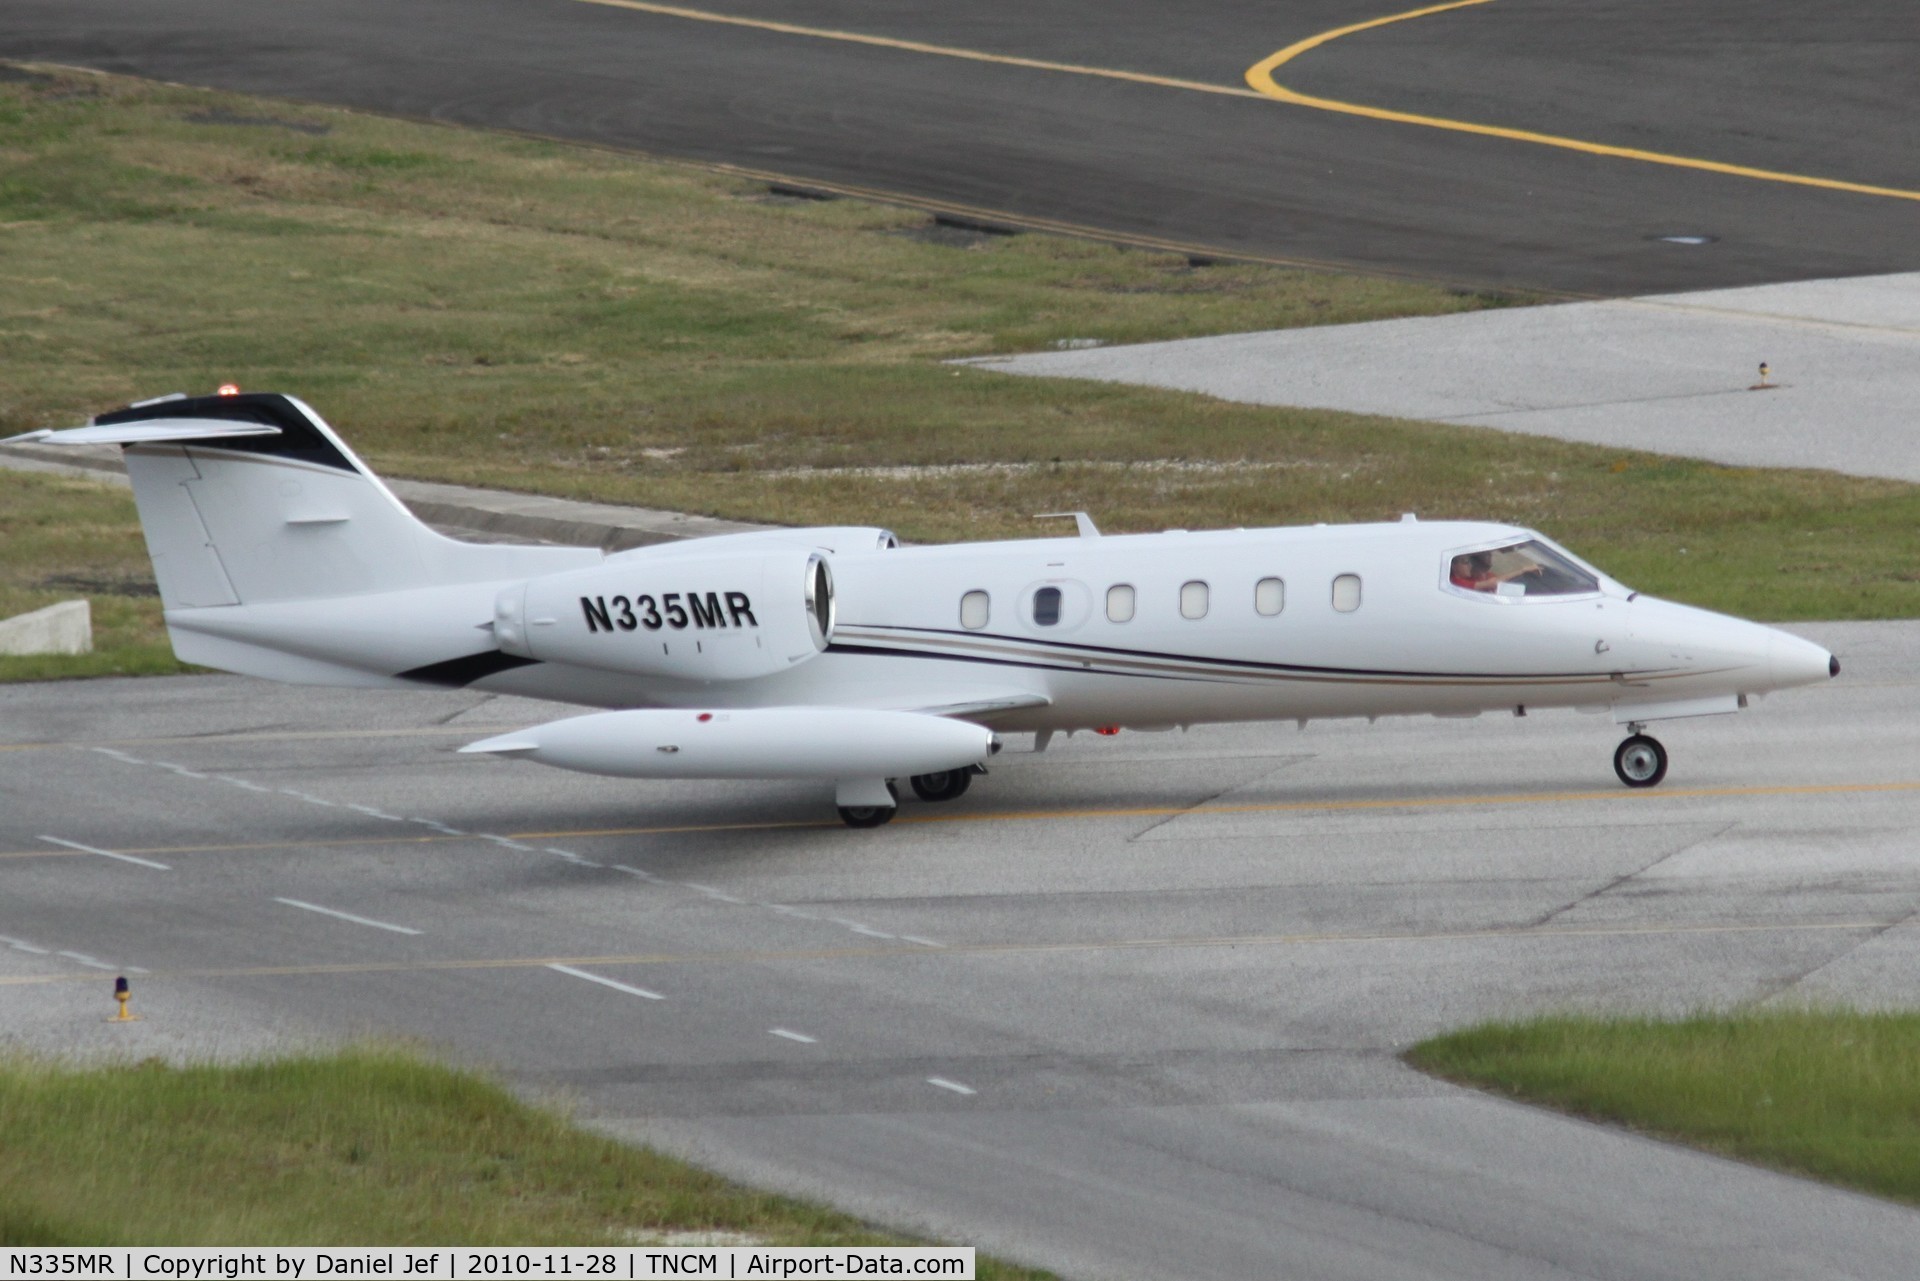 N335MR, 1981 Learjet 35A C/N 35A-443, N335MR taxing to the holding point A